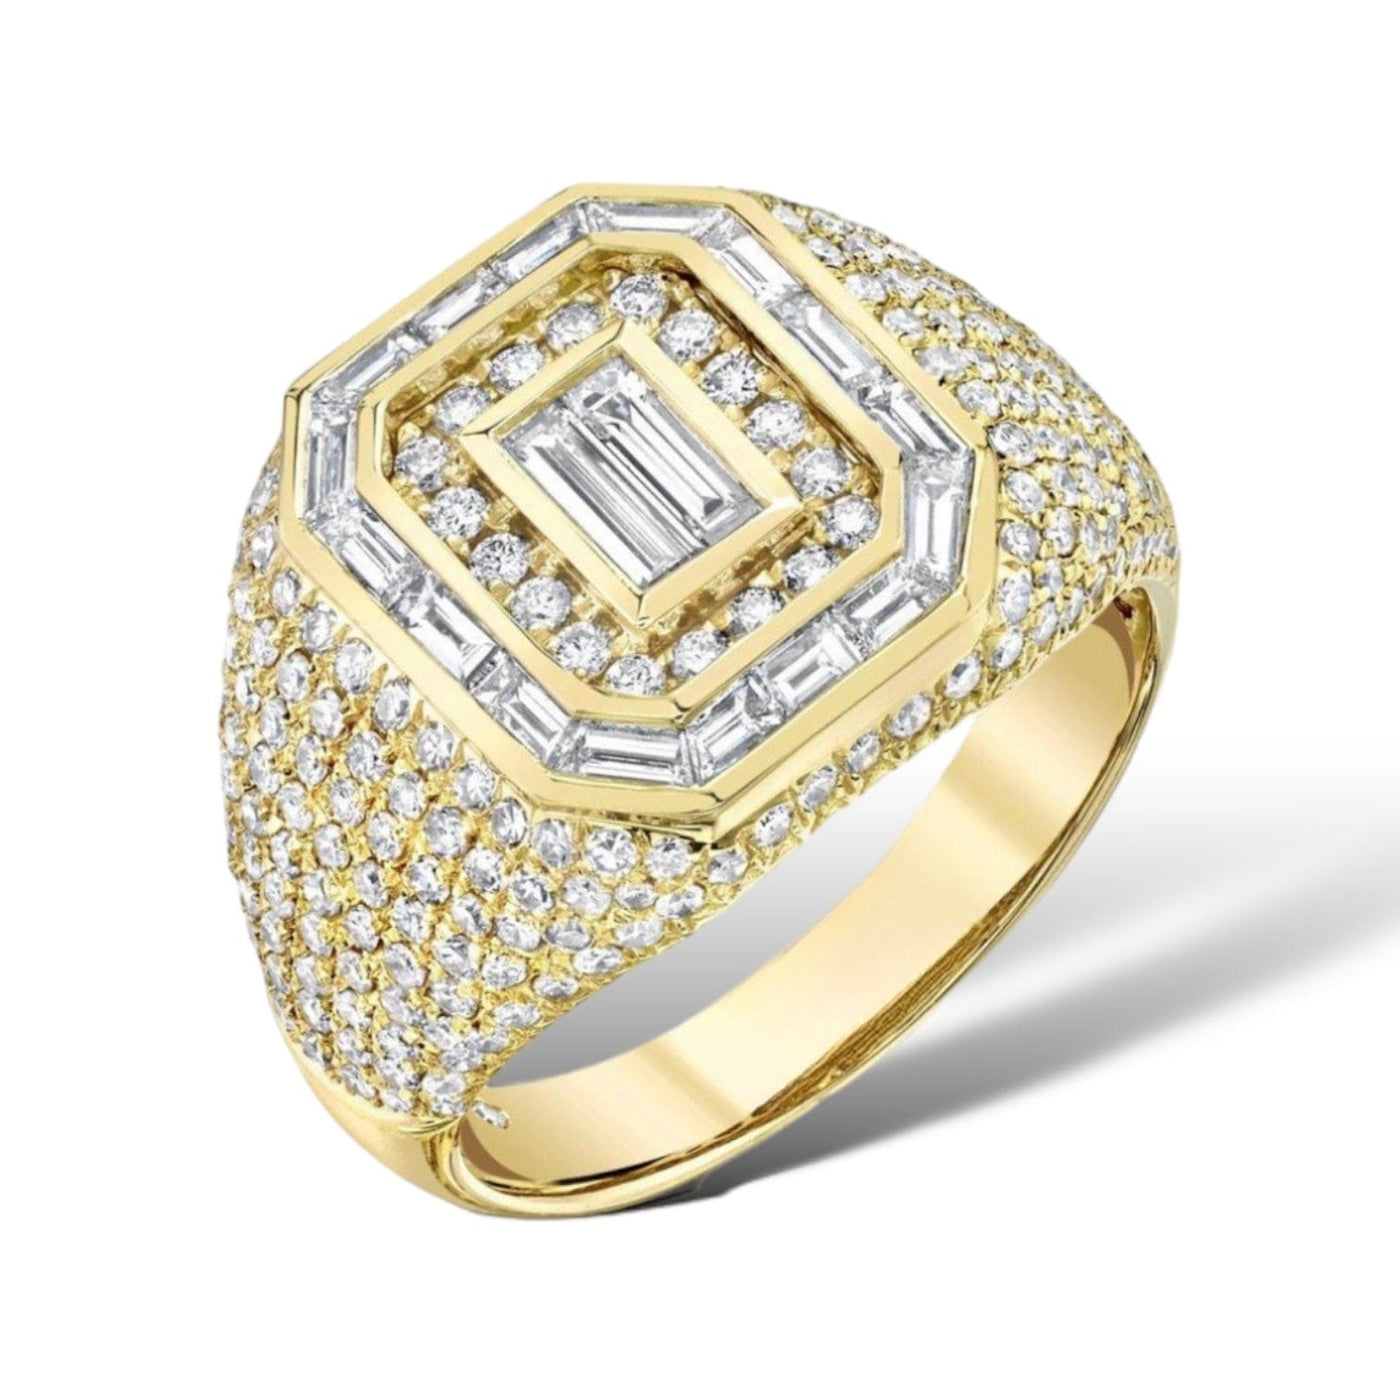 DOUBLE HALO SIGNET RING WITH BAGUETTE AND ROUND DIAMONDS